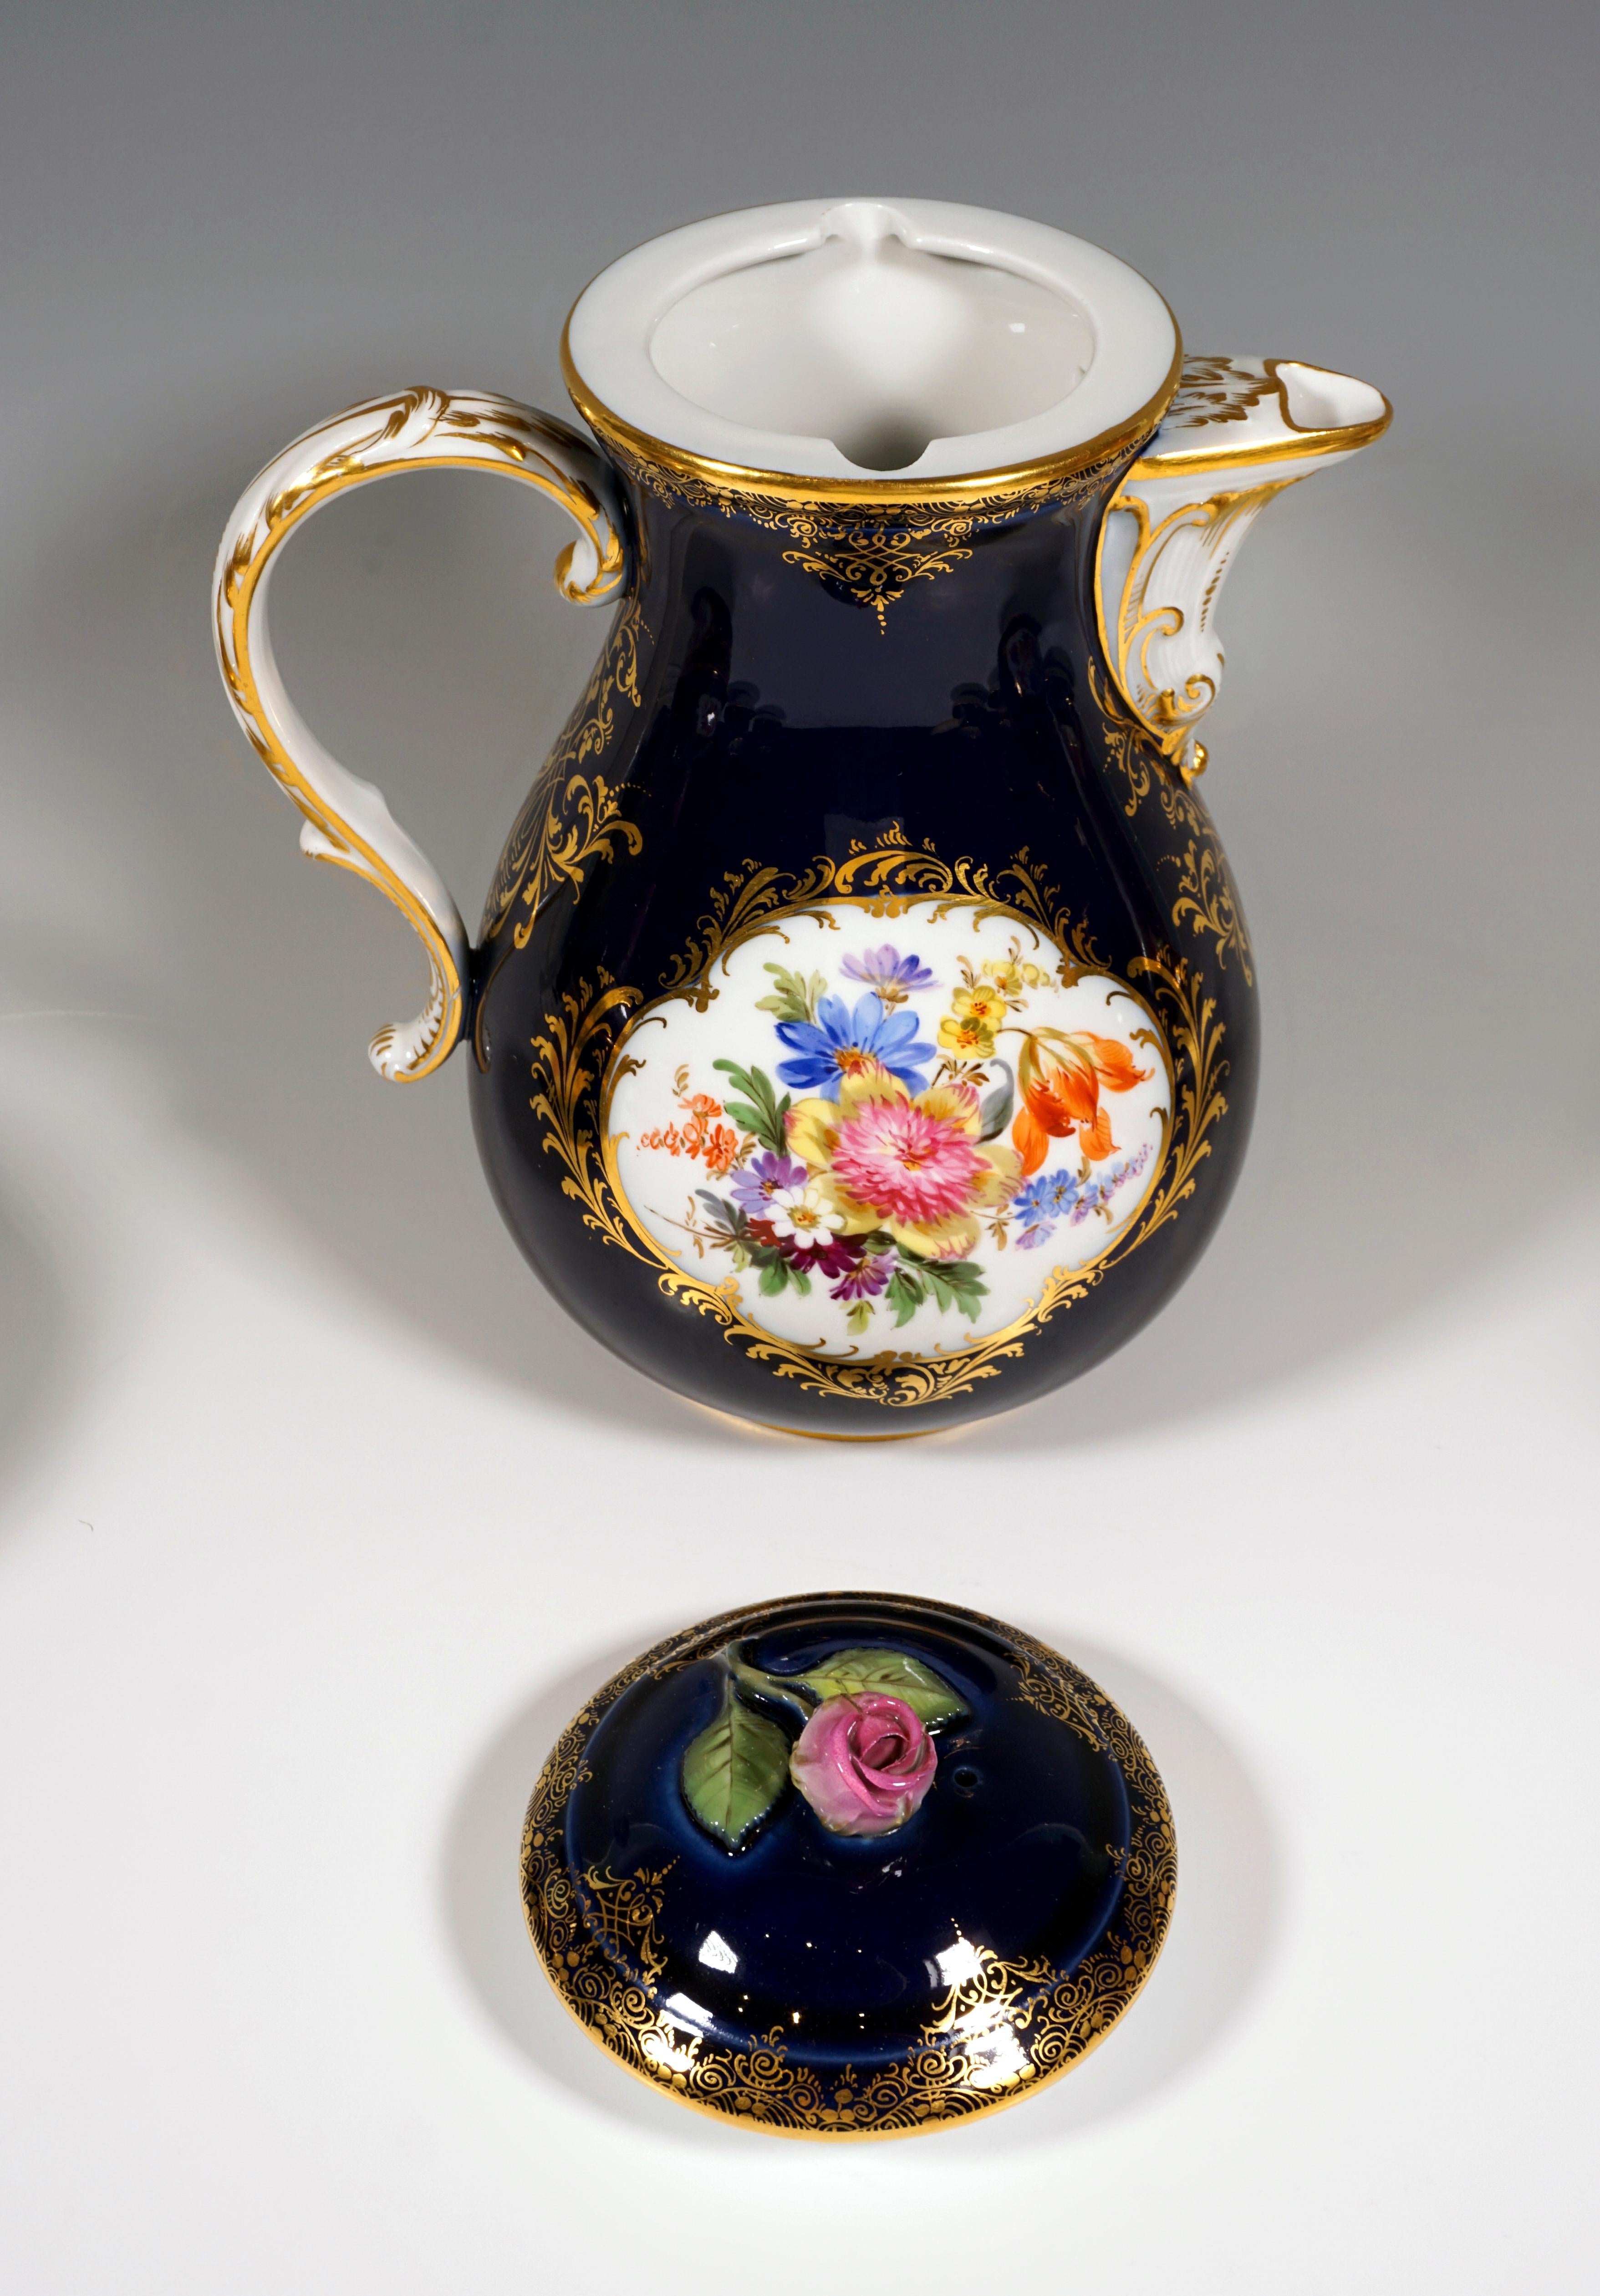 German 19th Century Meissen Coffee Set for 6 Persons, Cobalt, Bouquets and Gold Decor